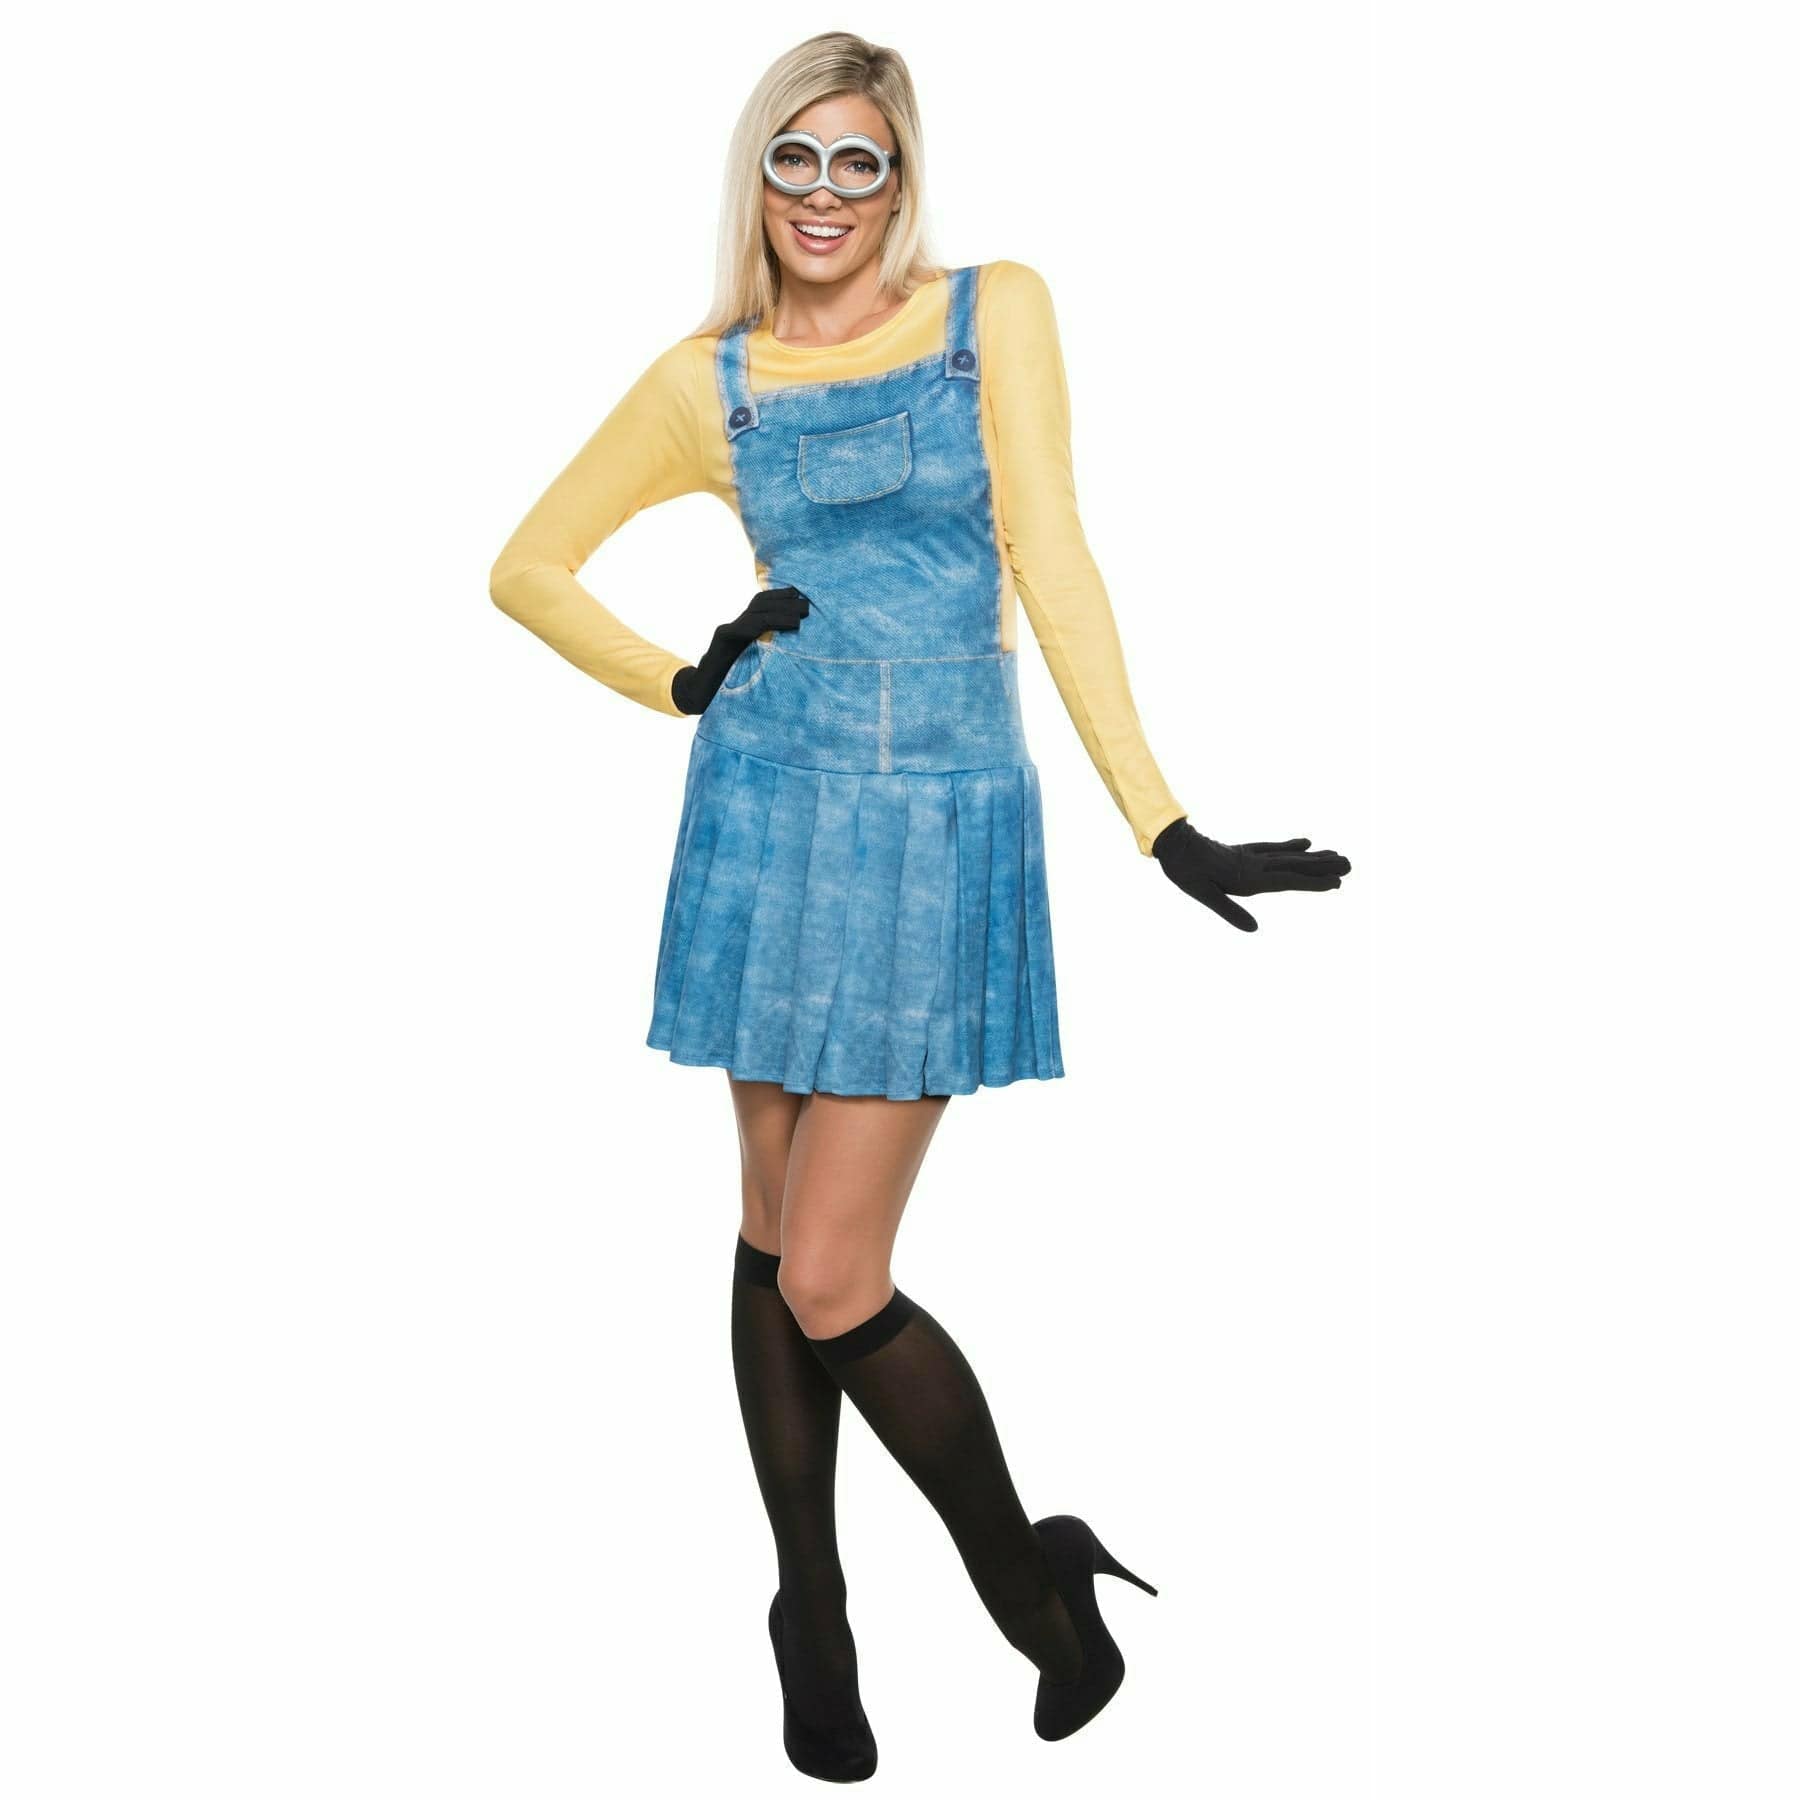 Ultimate Party Super Stores COSTUMES Small (2-6) Womens Female Minion Adult Costume